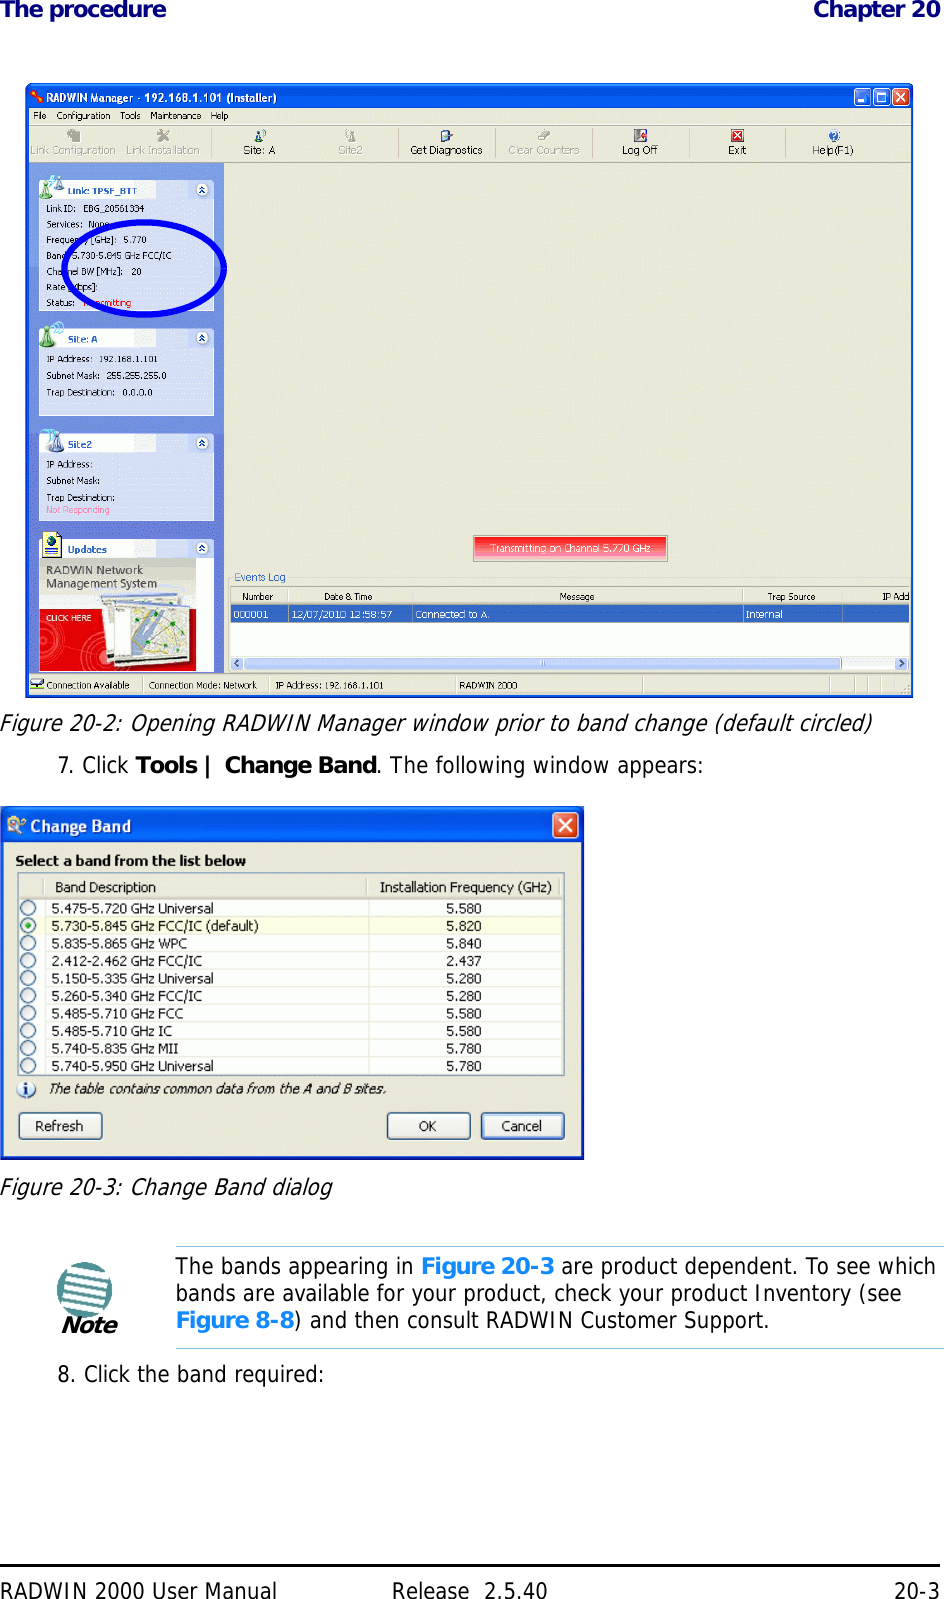 The procedure Chapter 20RADWIN 2000 User Manual Release  2.5.40 20-3Figure 20-2: Opening RADWIN Manager window prior to band change (default circled)7. Click Tools | Change Band. The following window appears:Figure 20-3: Change Band dialog8. Click the band required:NoteThe bands appearing in Figure 20-3 are product dependent. To see which bands are available for your product, check your product Inventory (see Figure 8-8) and then consult RADWIN Customer Support.